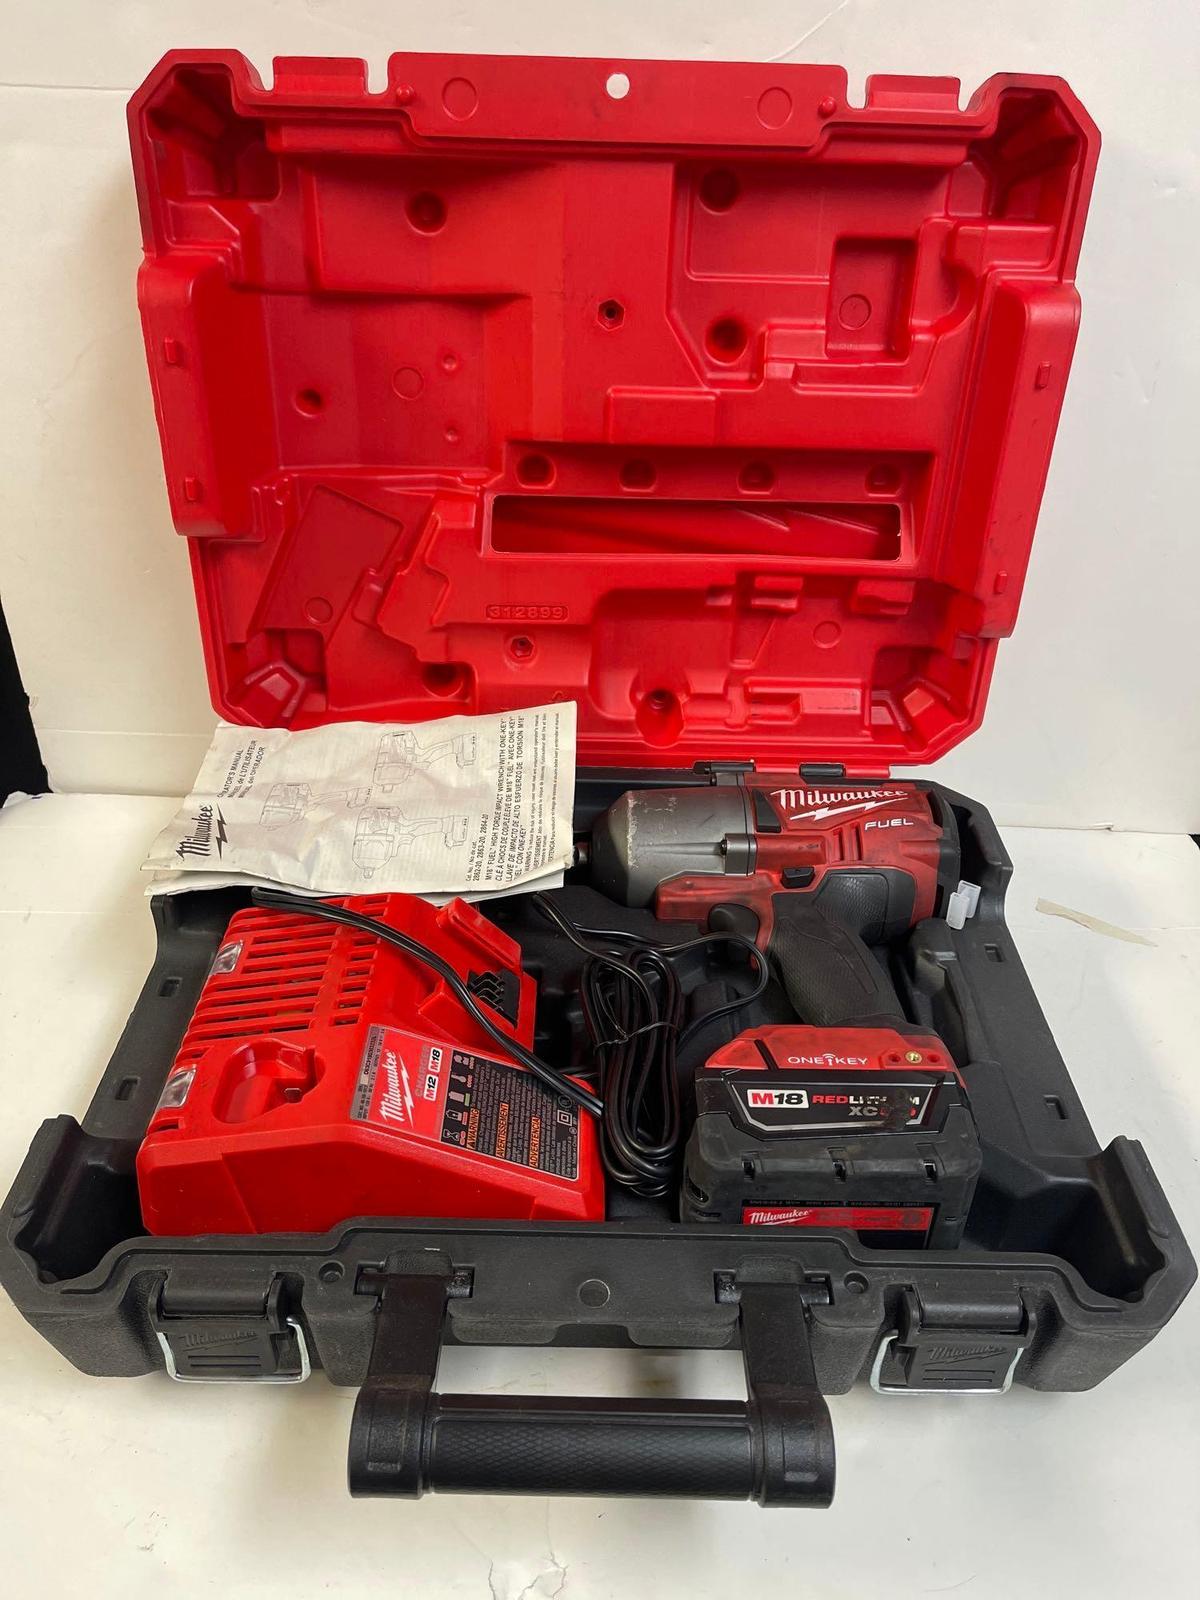 MILWAUKEE M18 HIGH TORQUE IMPACT WRENCH WITH ONE KEY